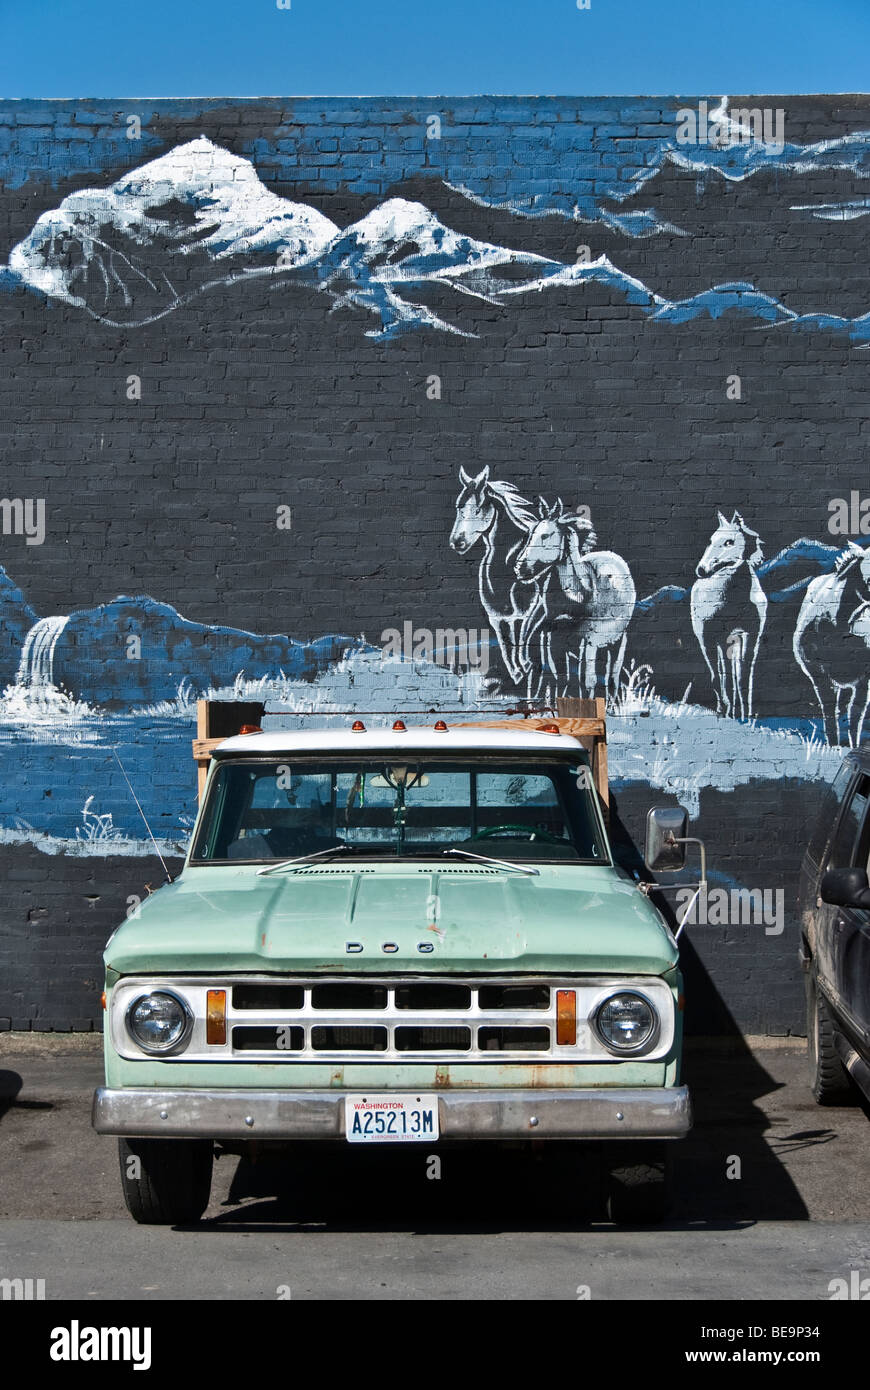 old late sixties Dodge truck parked in front of mural painted on brick wall depicting wild horses running in foothill country Stock Photo